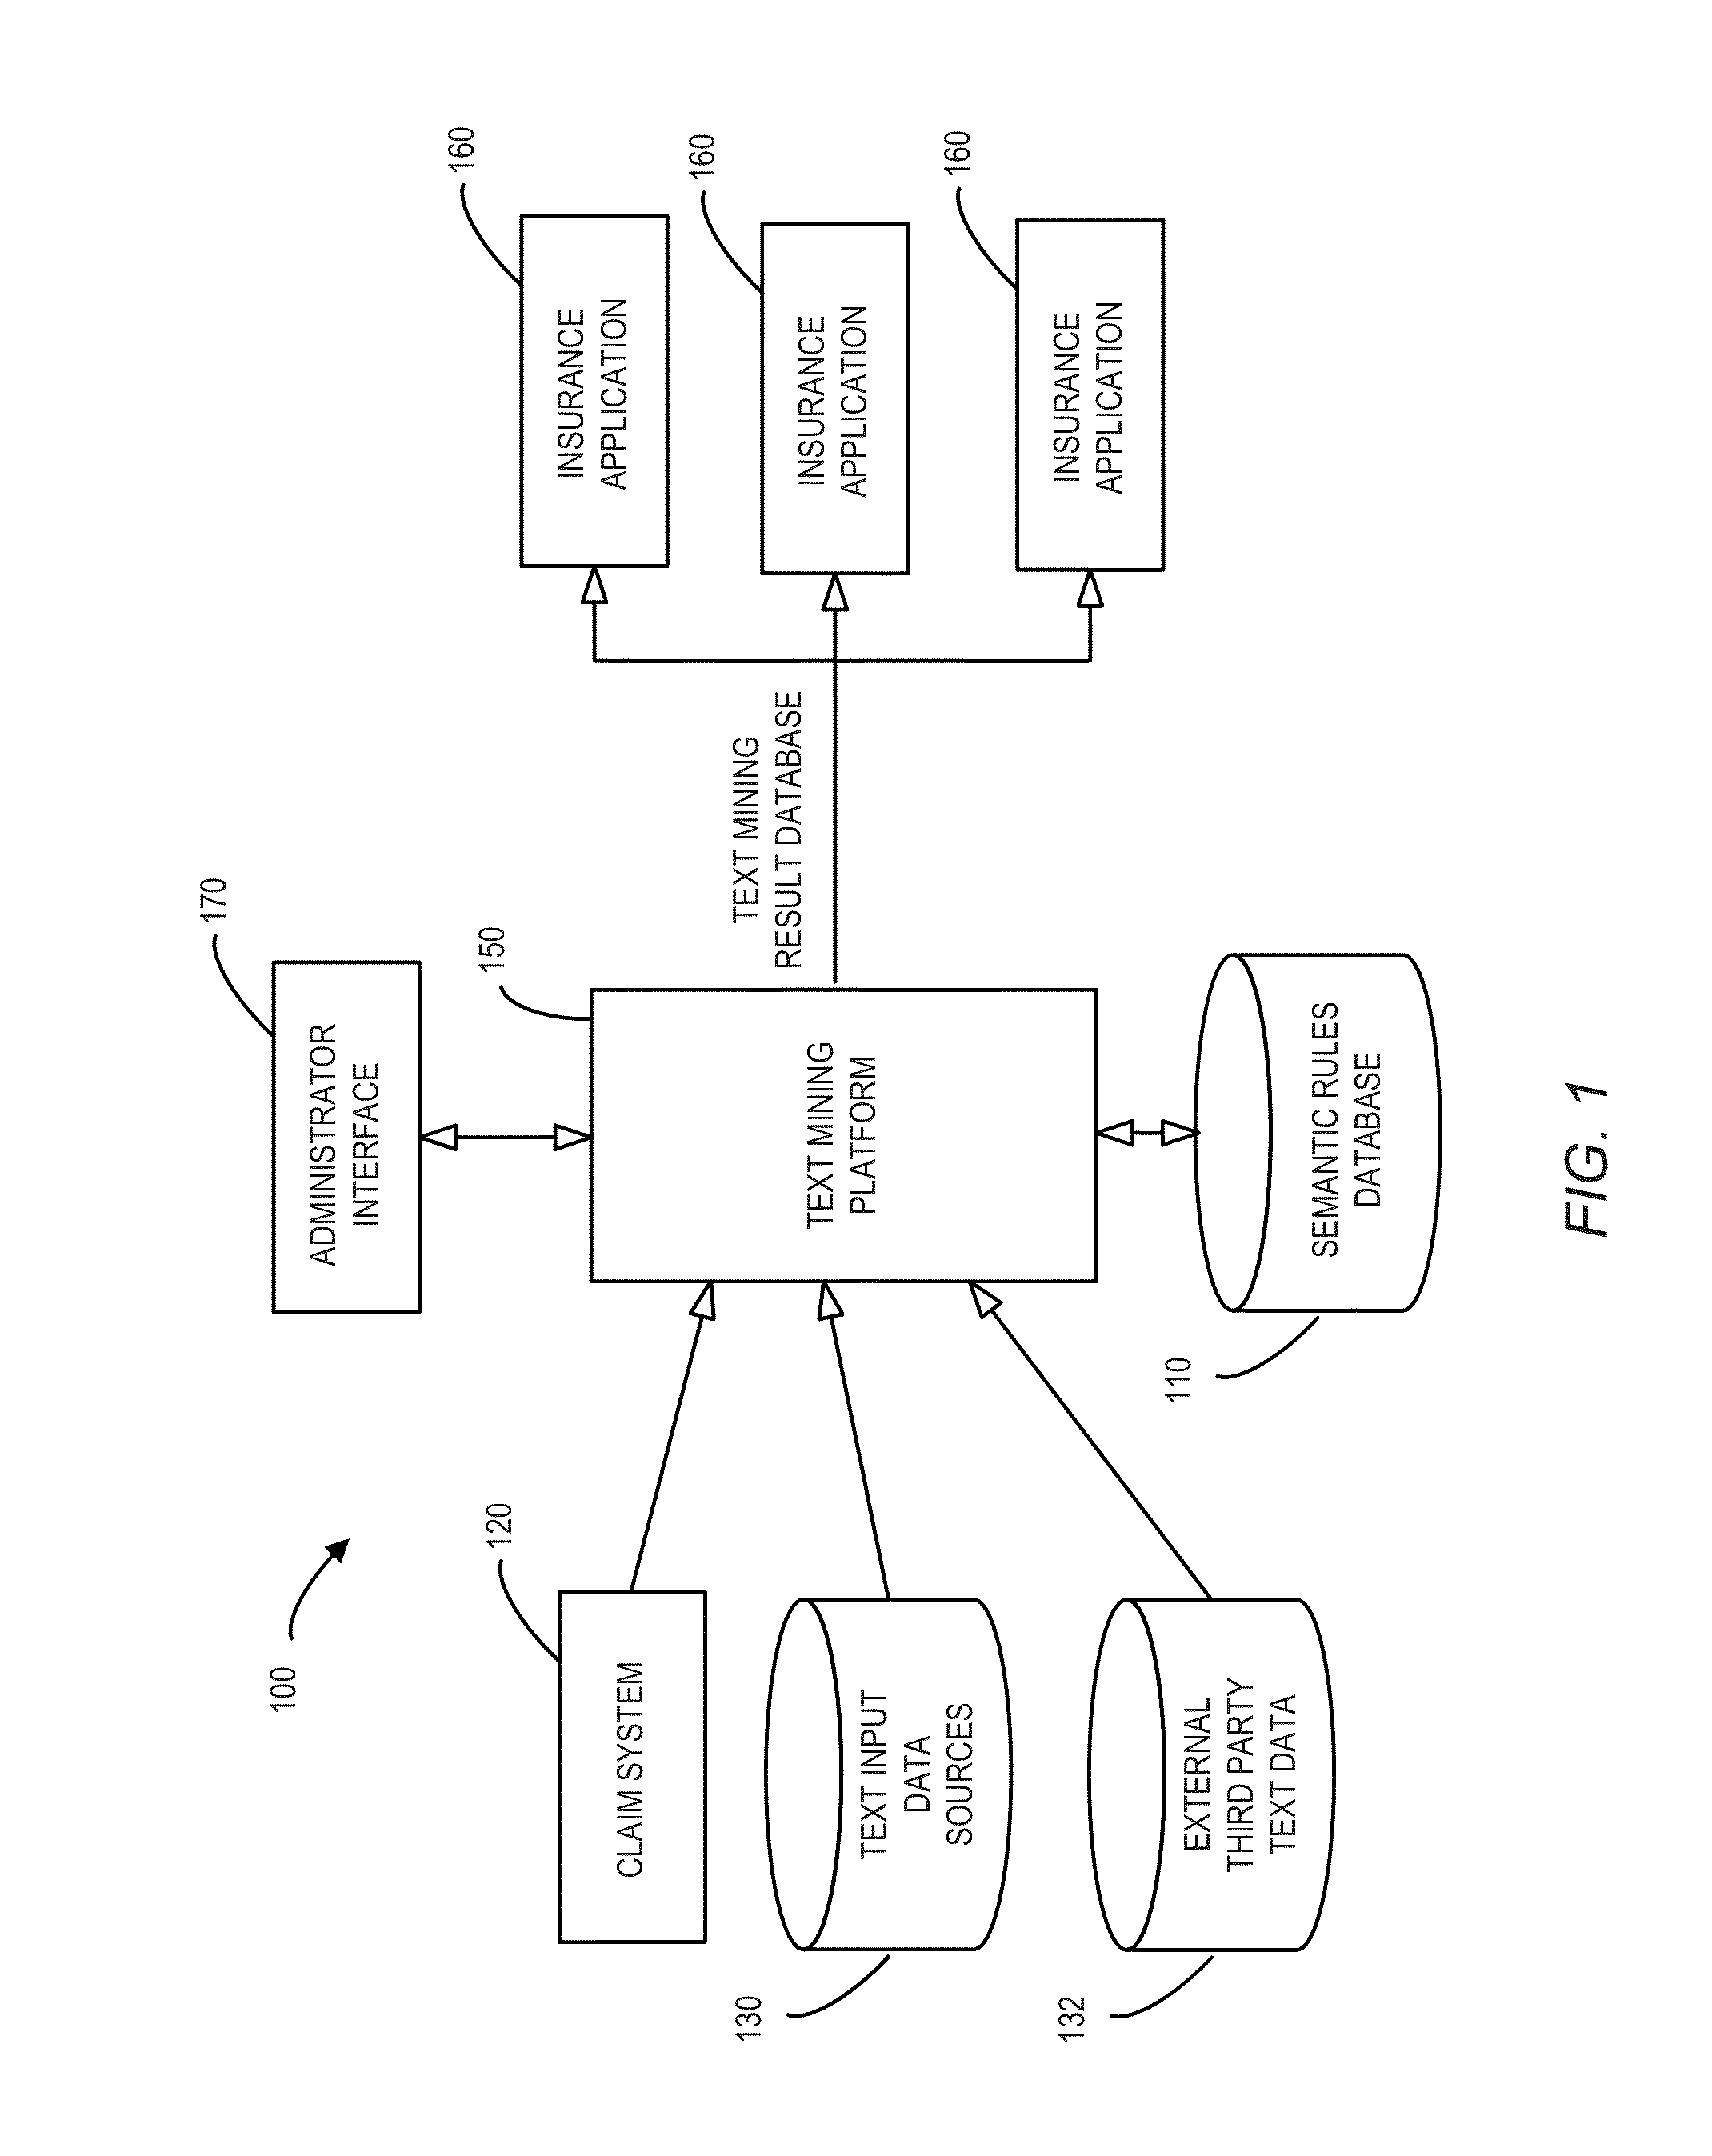 System and method for evaluating text to support multiple insurance applications